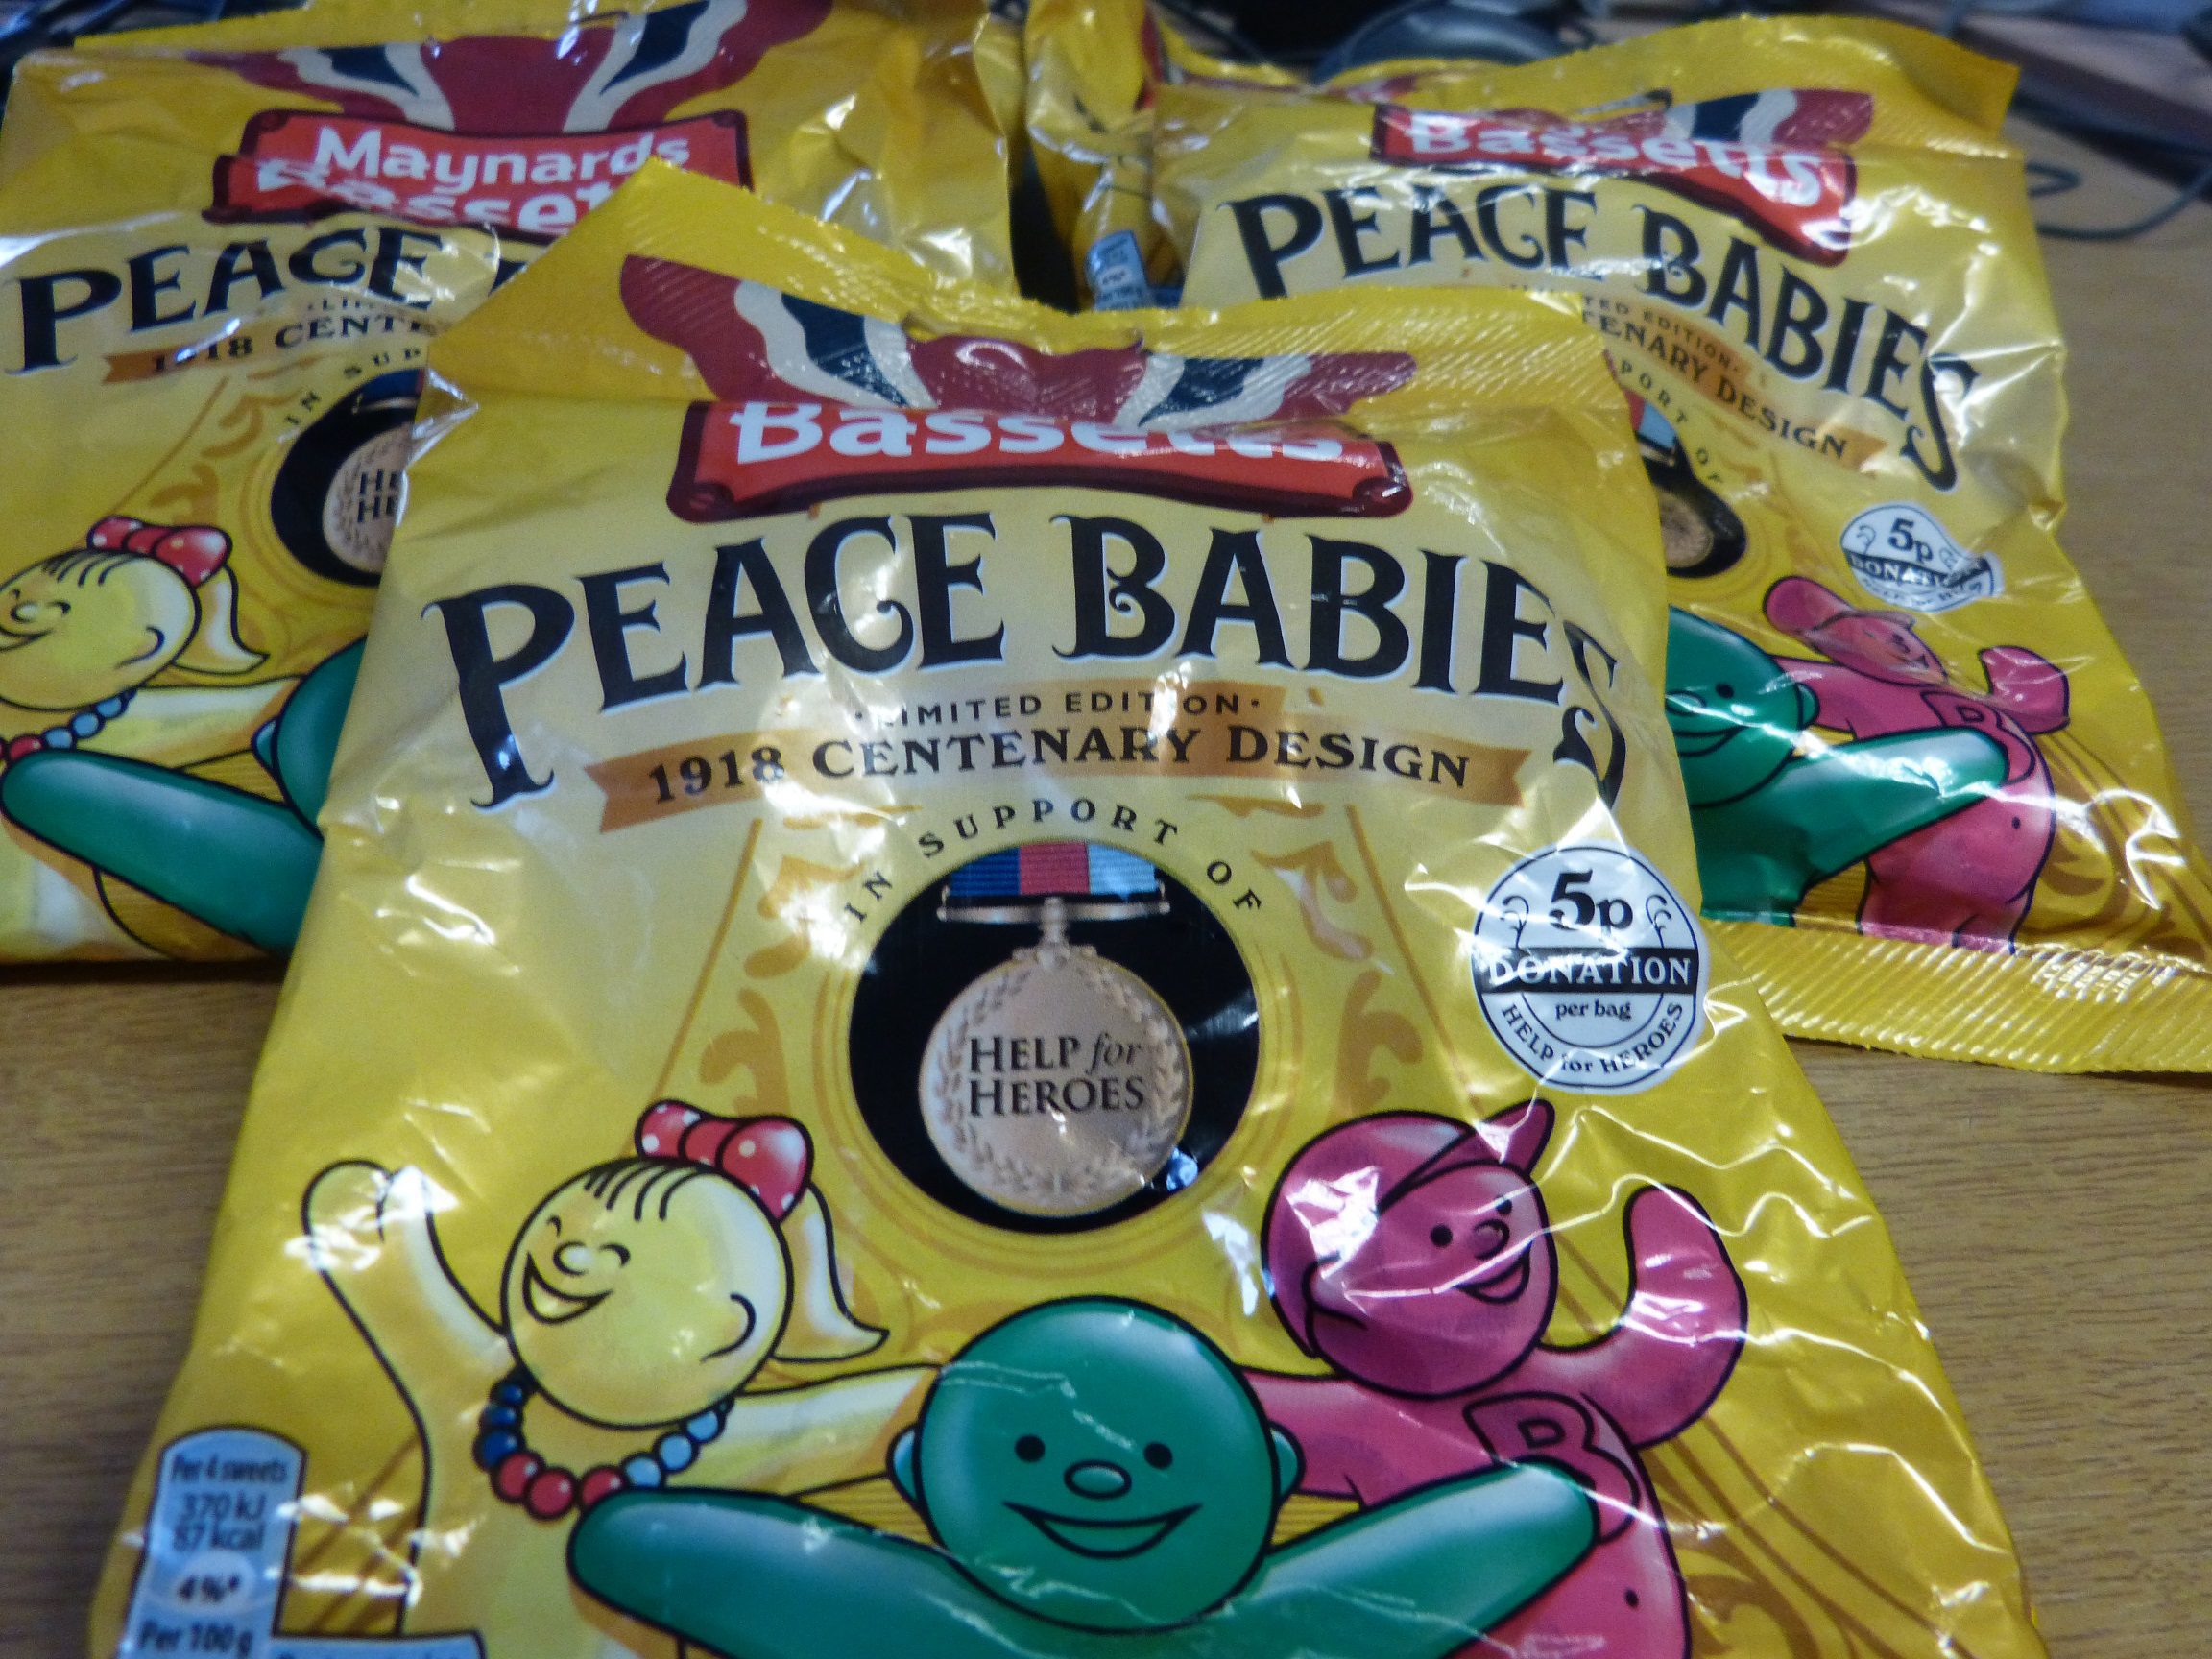 What did Jelly Babies have to do with World War One?